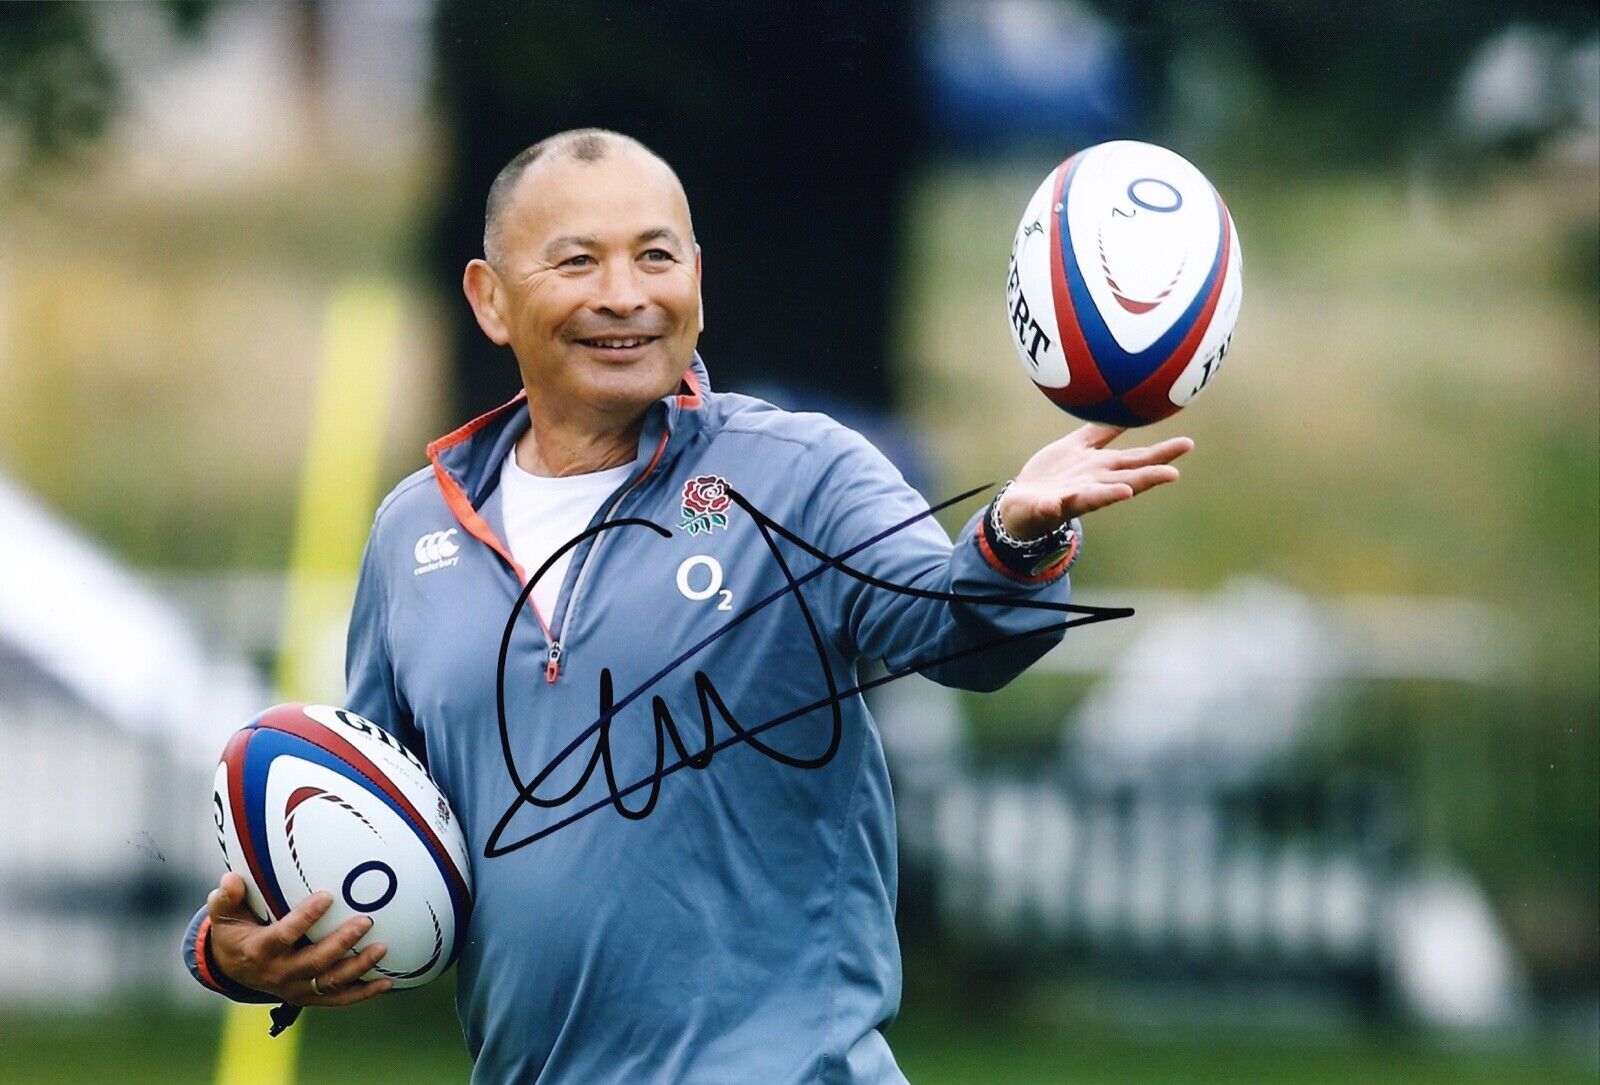 Eddie Jones Signed 12X8 Photo Poster painting England RUGBY Coach AFTAL COA (E)